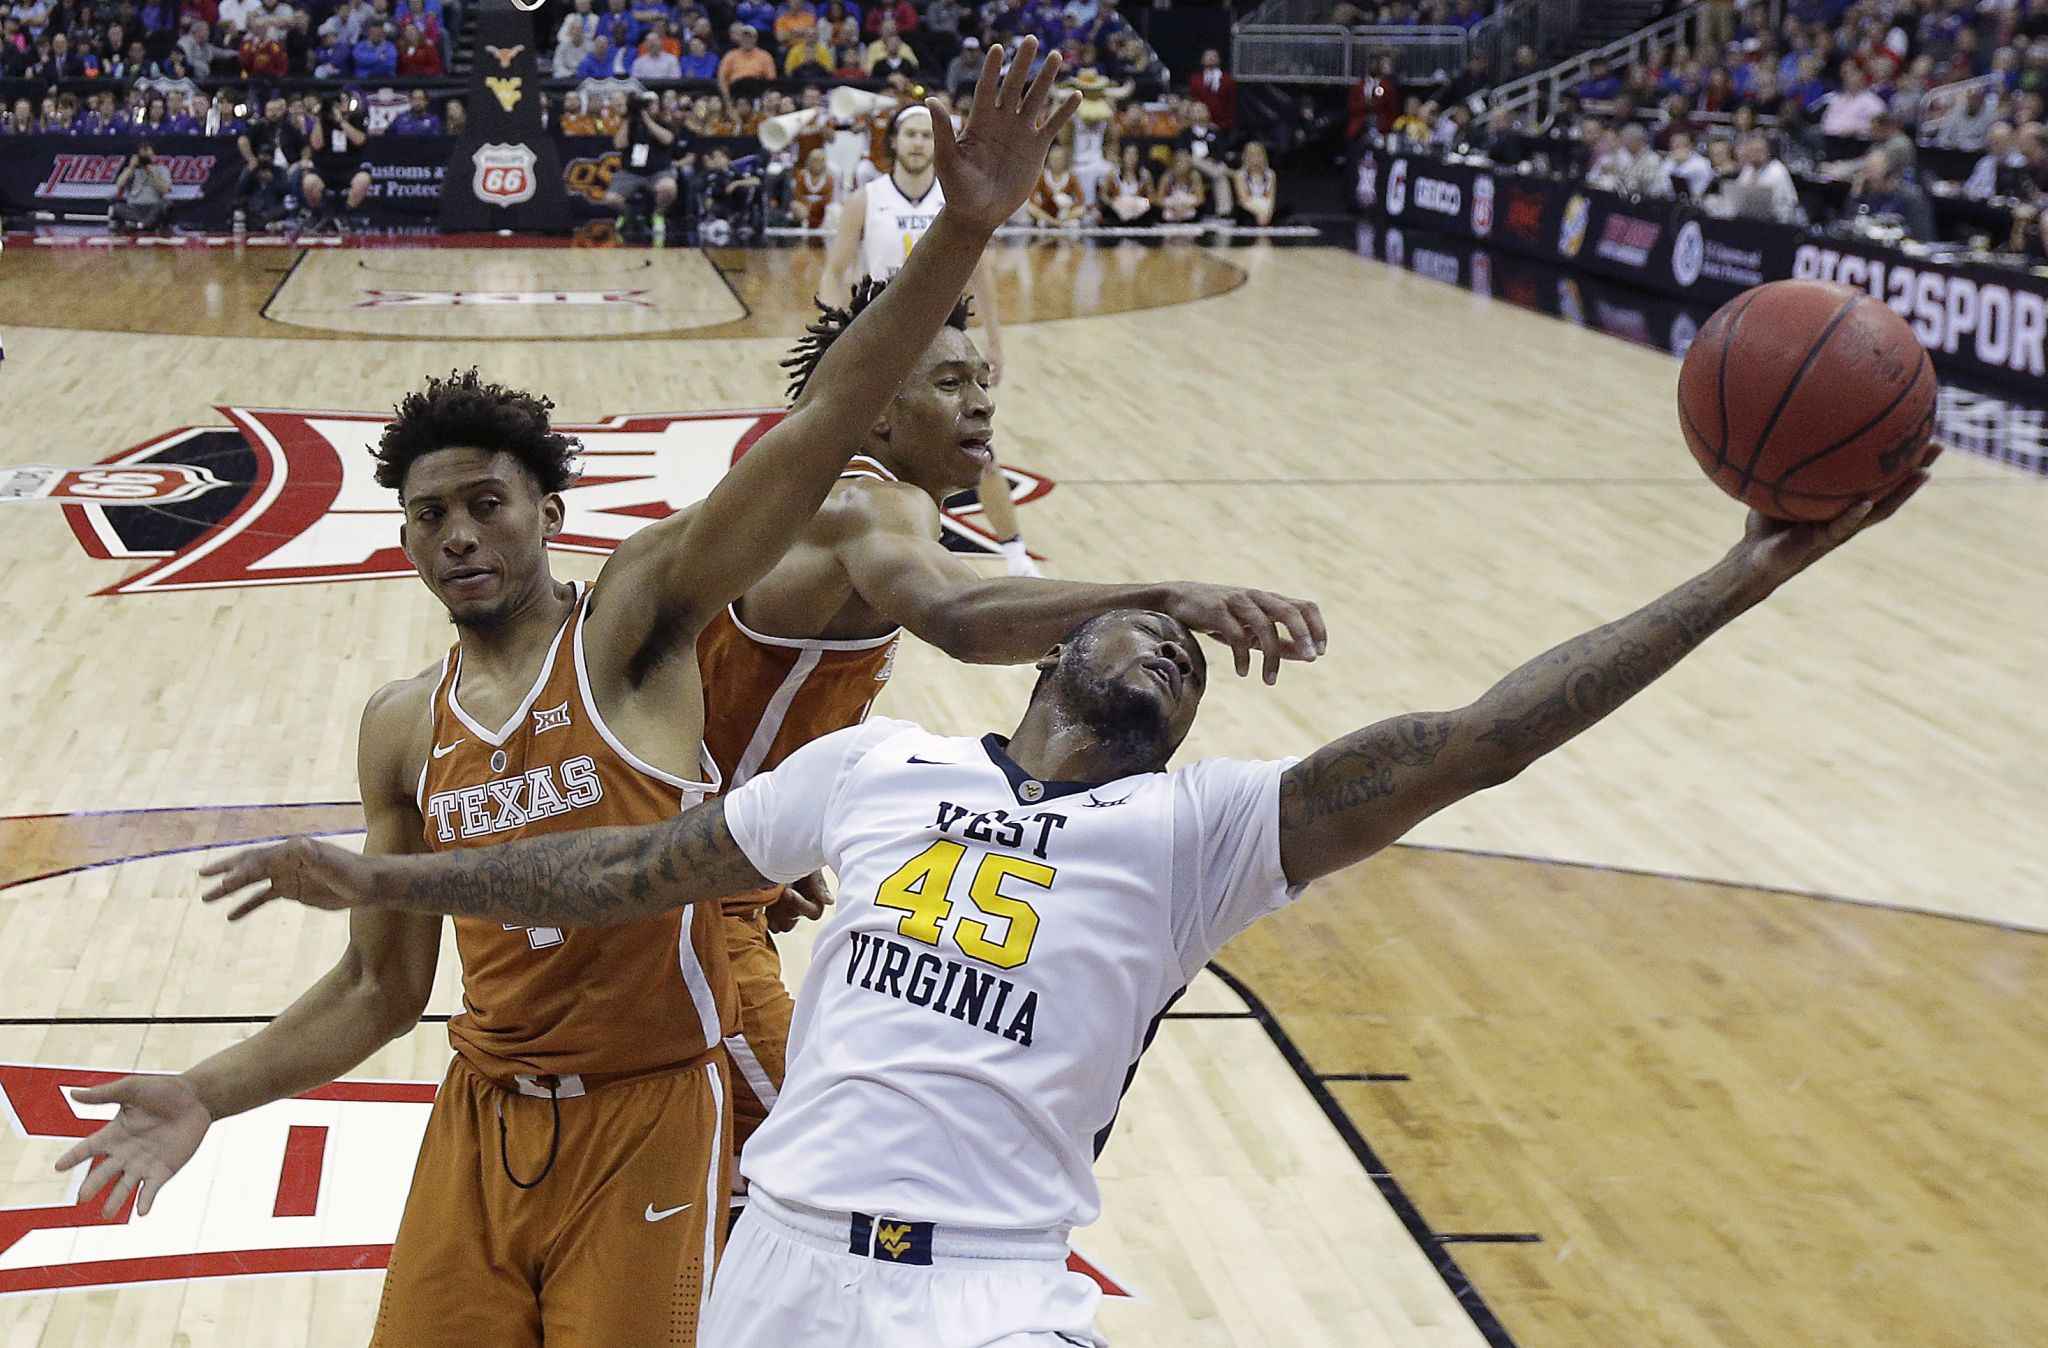 Carter leads No. 11 West Virginia past Texas in Big 12 tourney - NBC Sports